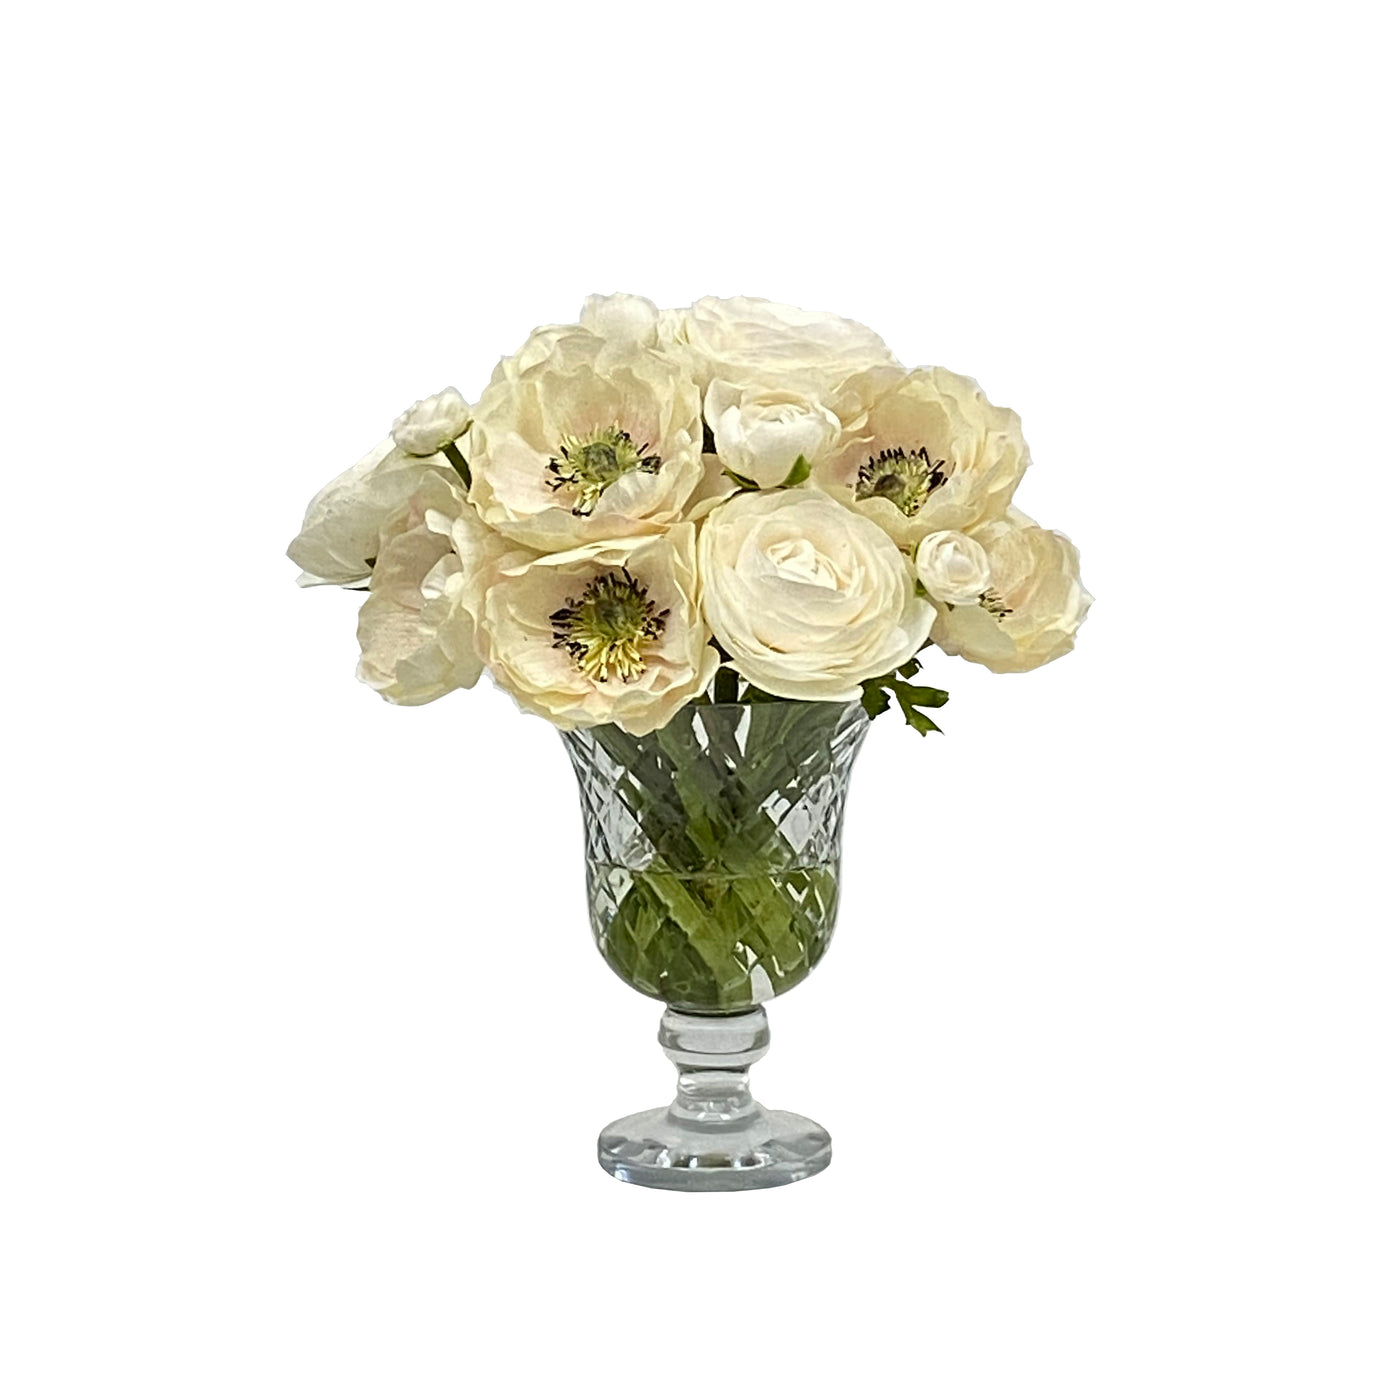 Realistic faux anemone ranunculus in vase 12 inch